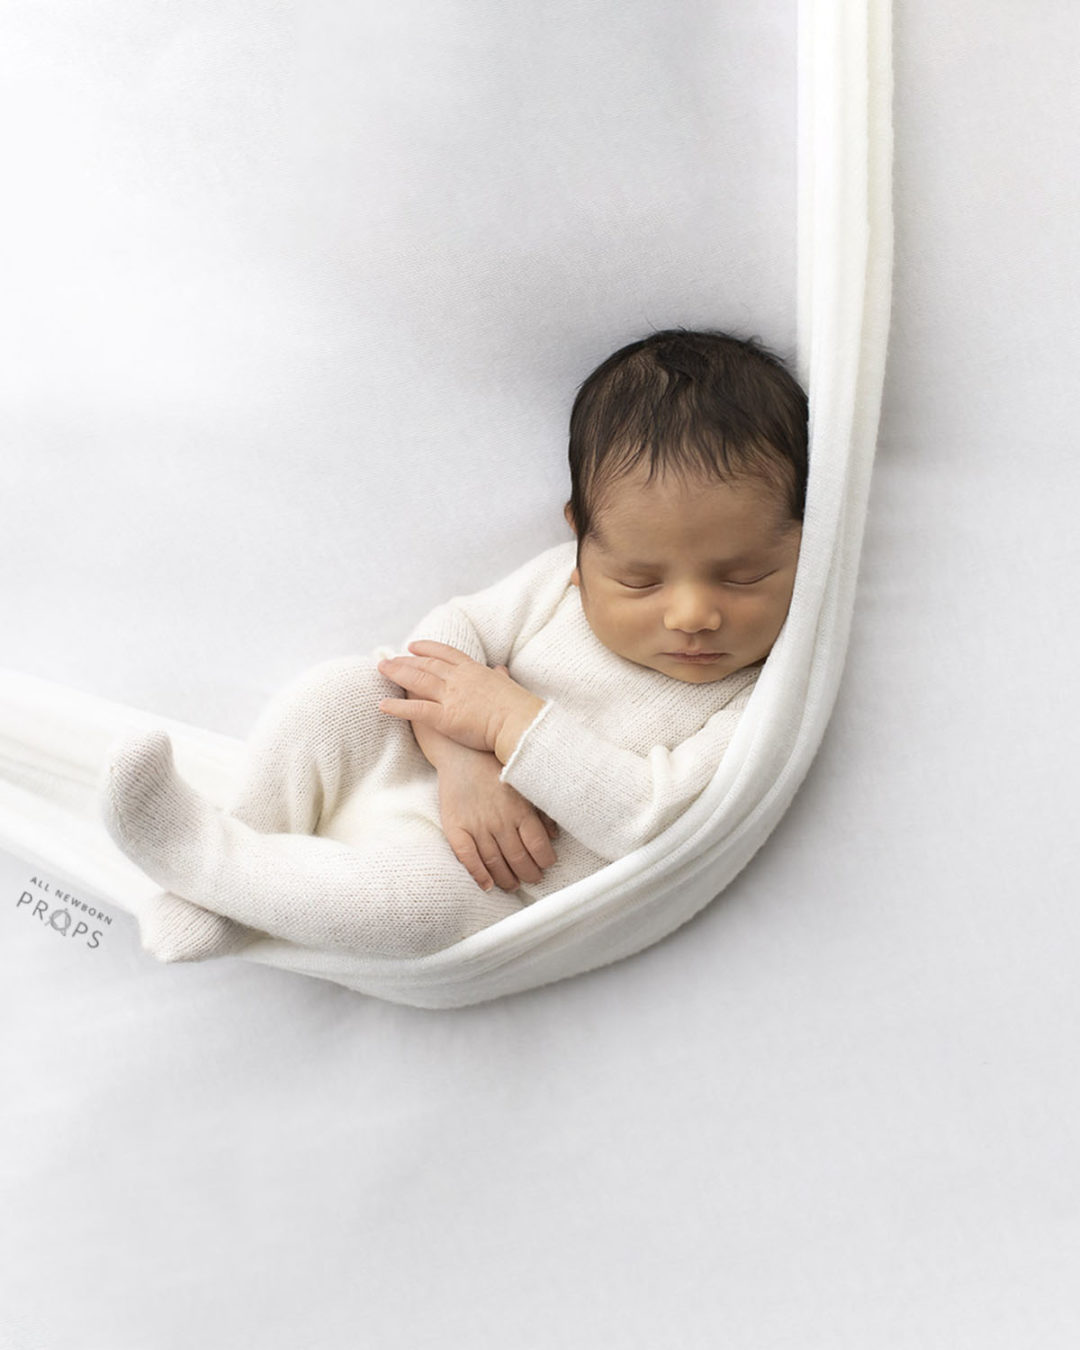 newborn-baby-photoshoot-outfits-knitted-sleepers-boy-white-europe